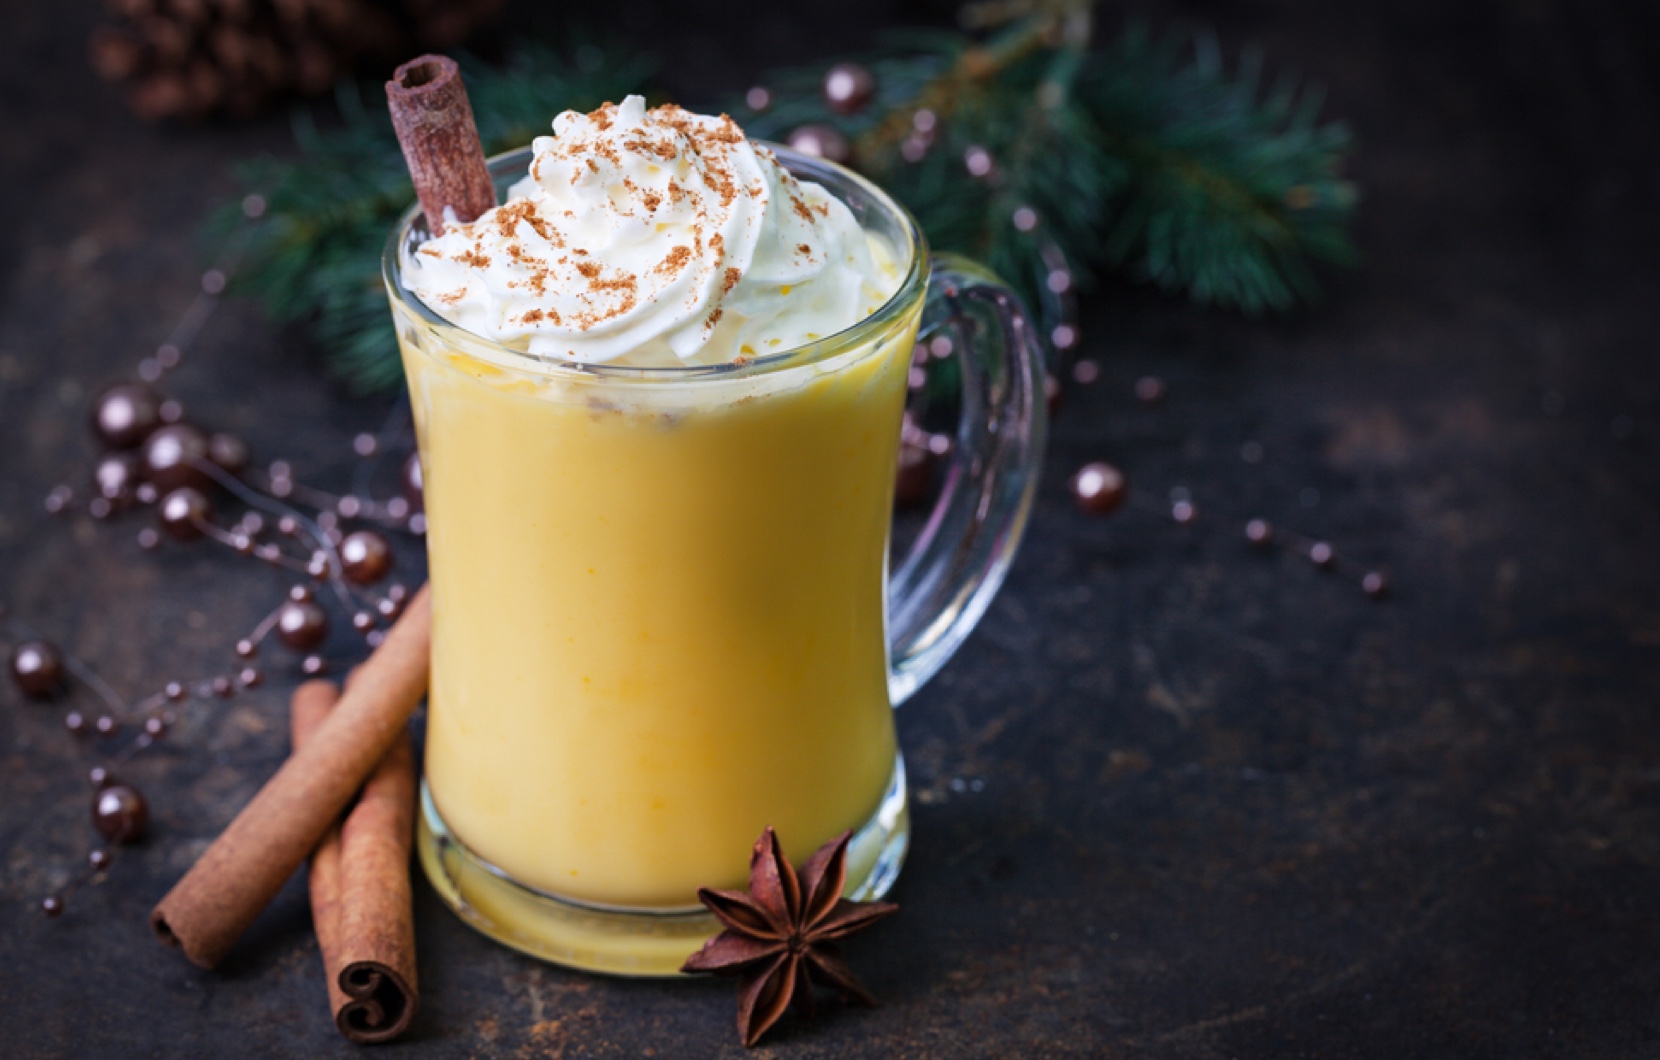 In Mexico and all over the world, Christmastime means Eggnog-time.